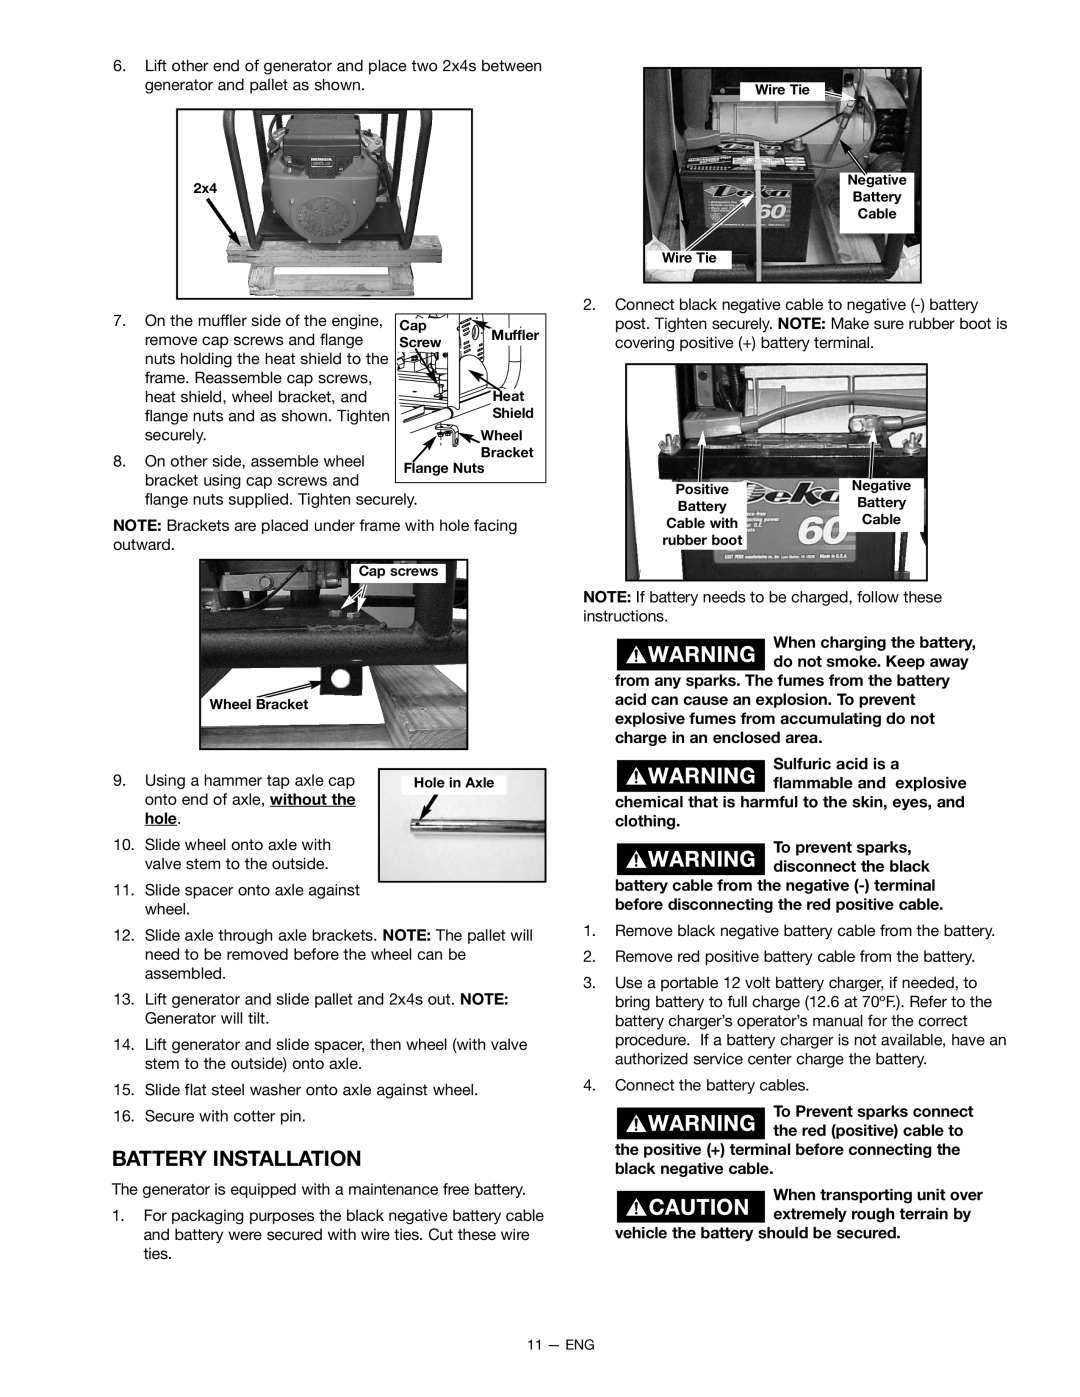 Porter-Cable H1000 instruction manual Battery Installation 